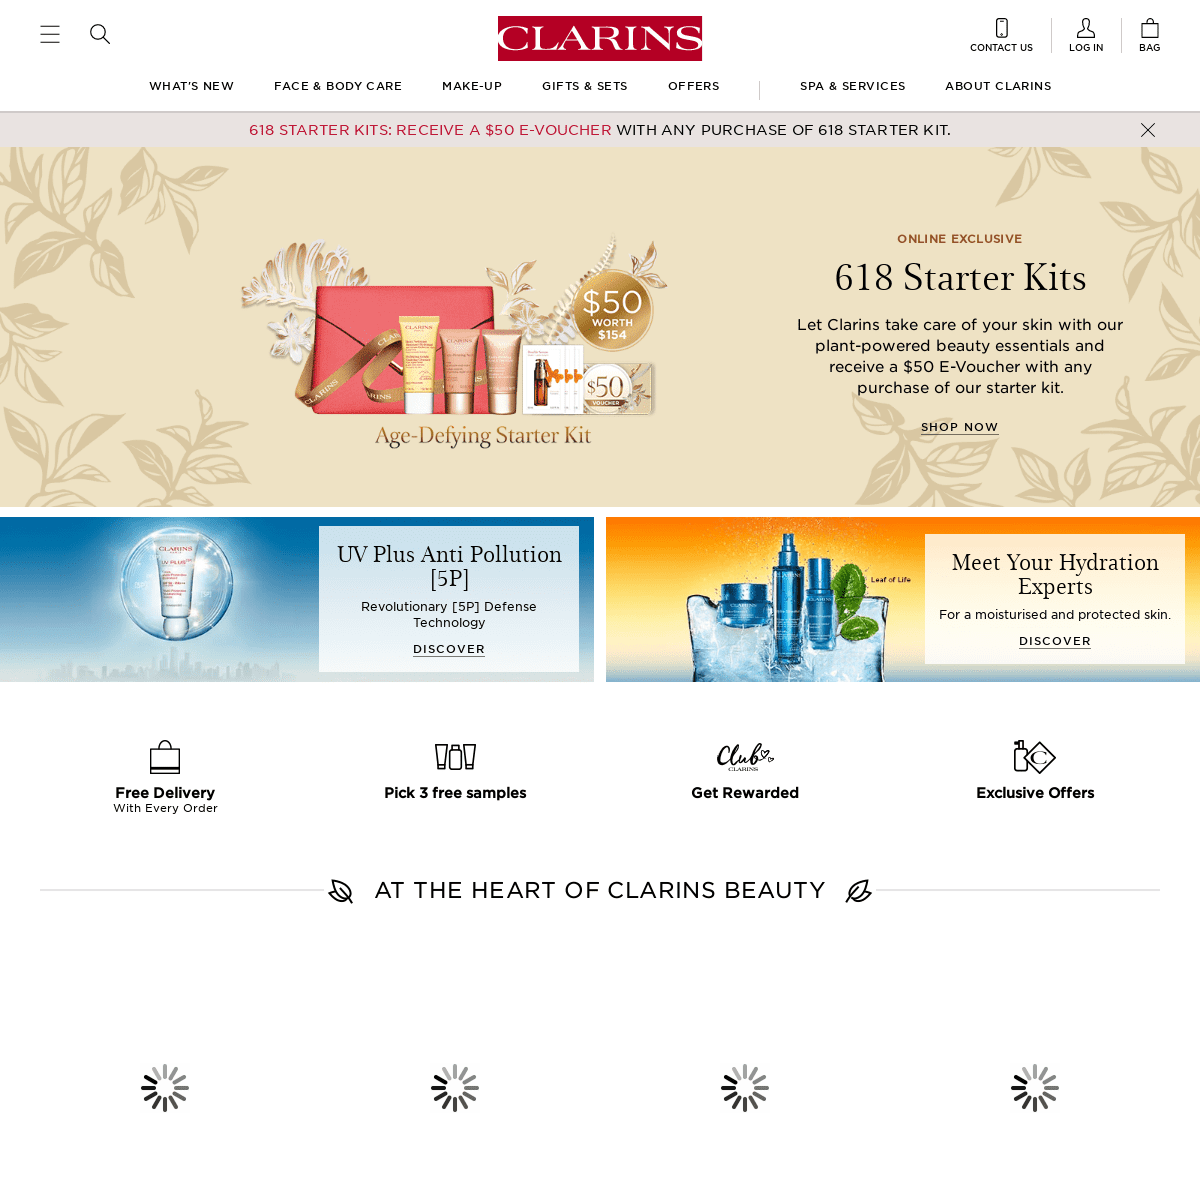 Clarins Singapore Online- Skincare for Face, Body & Makeup Products - Clarins